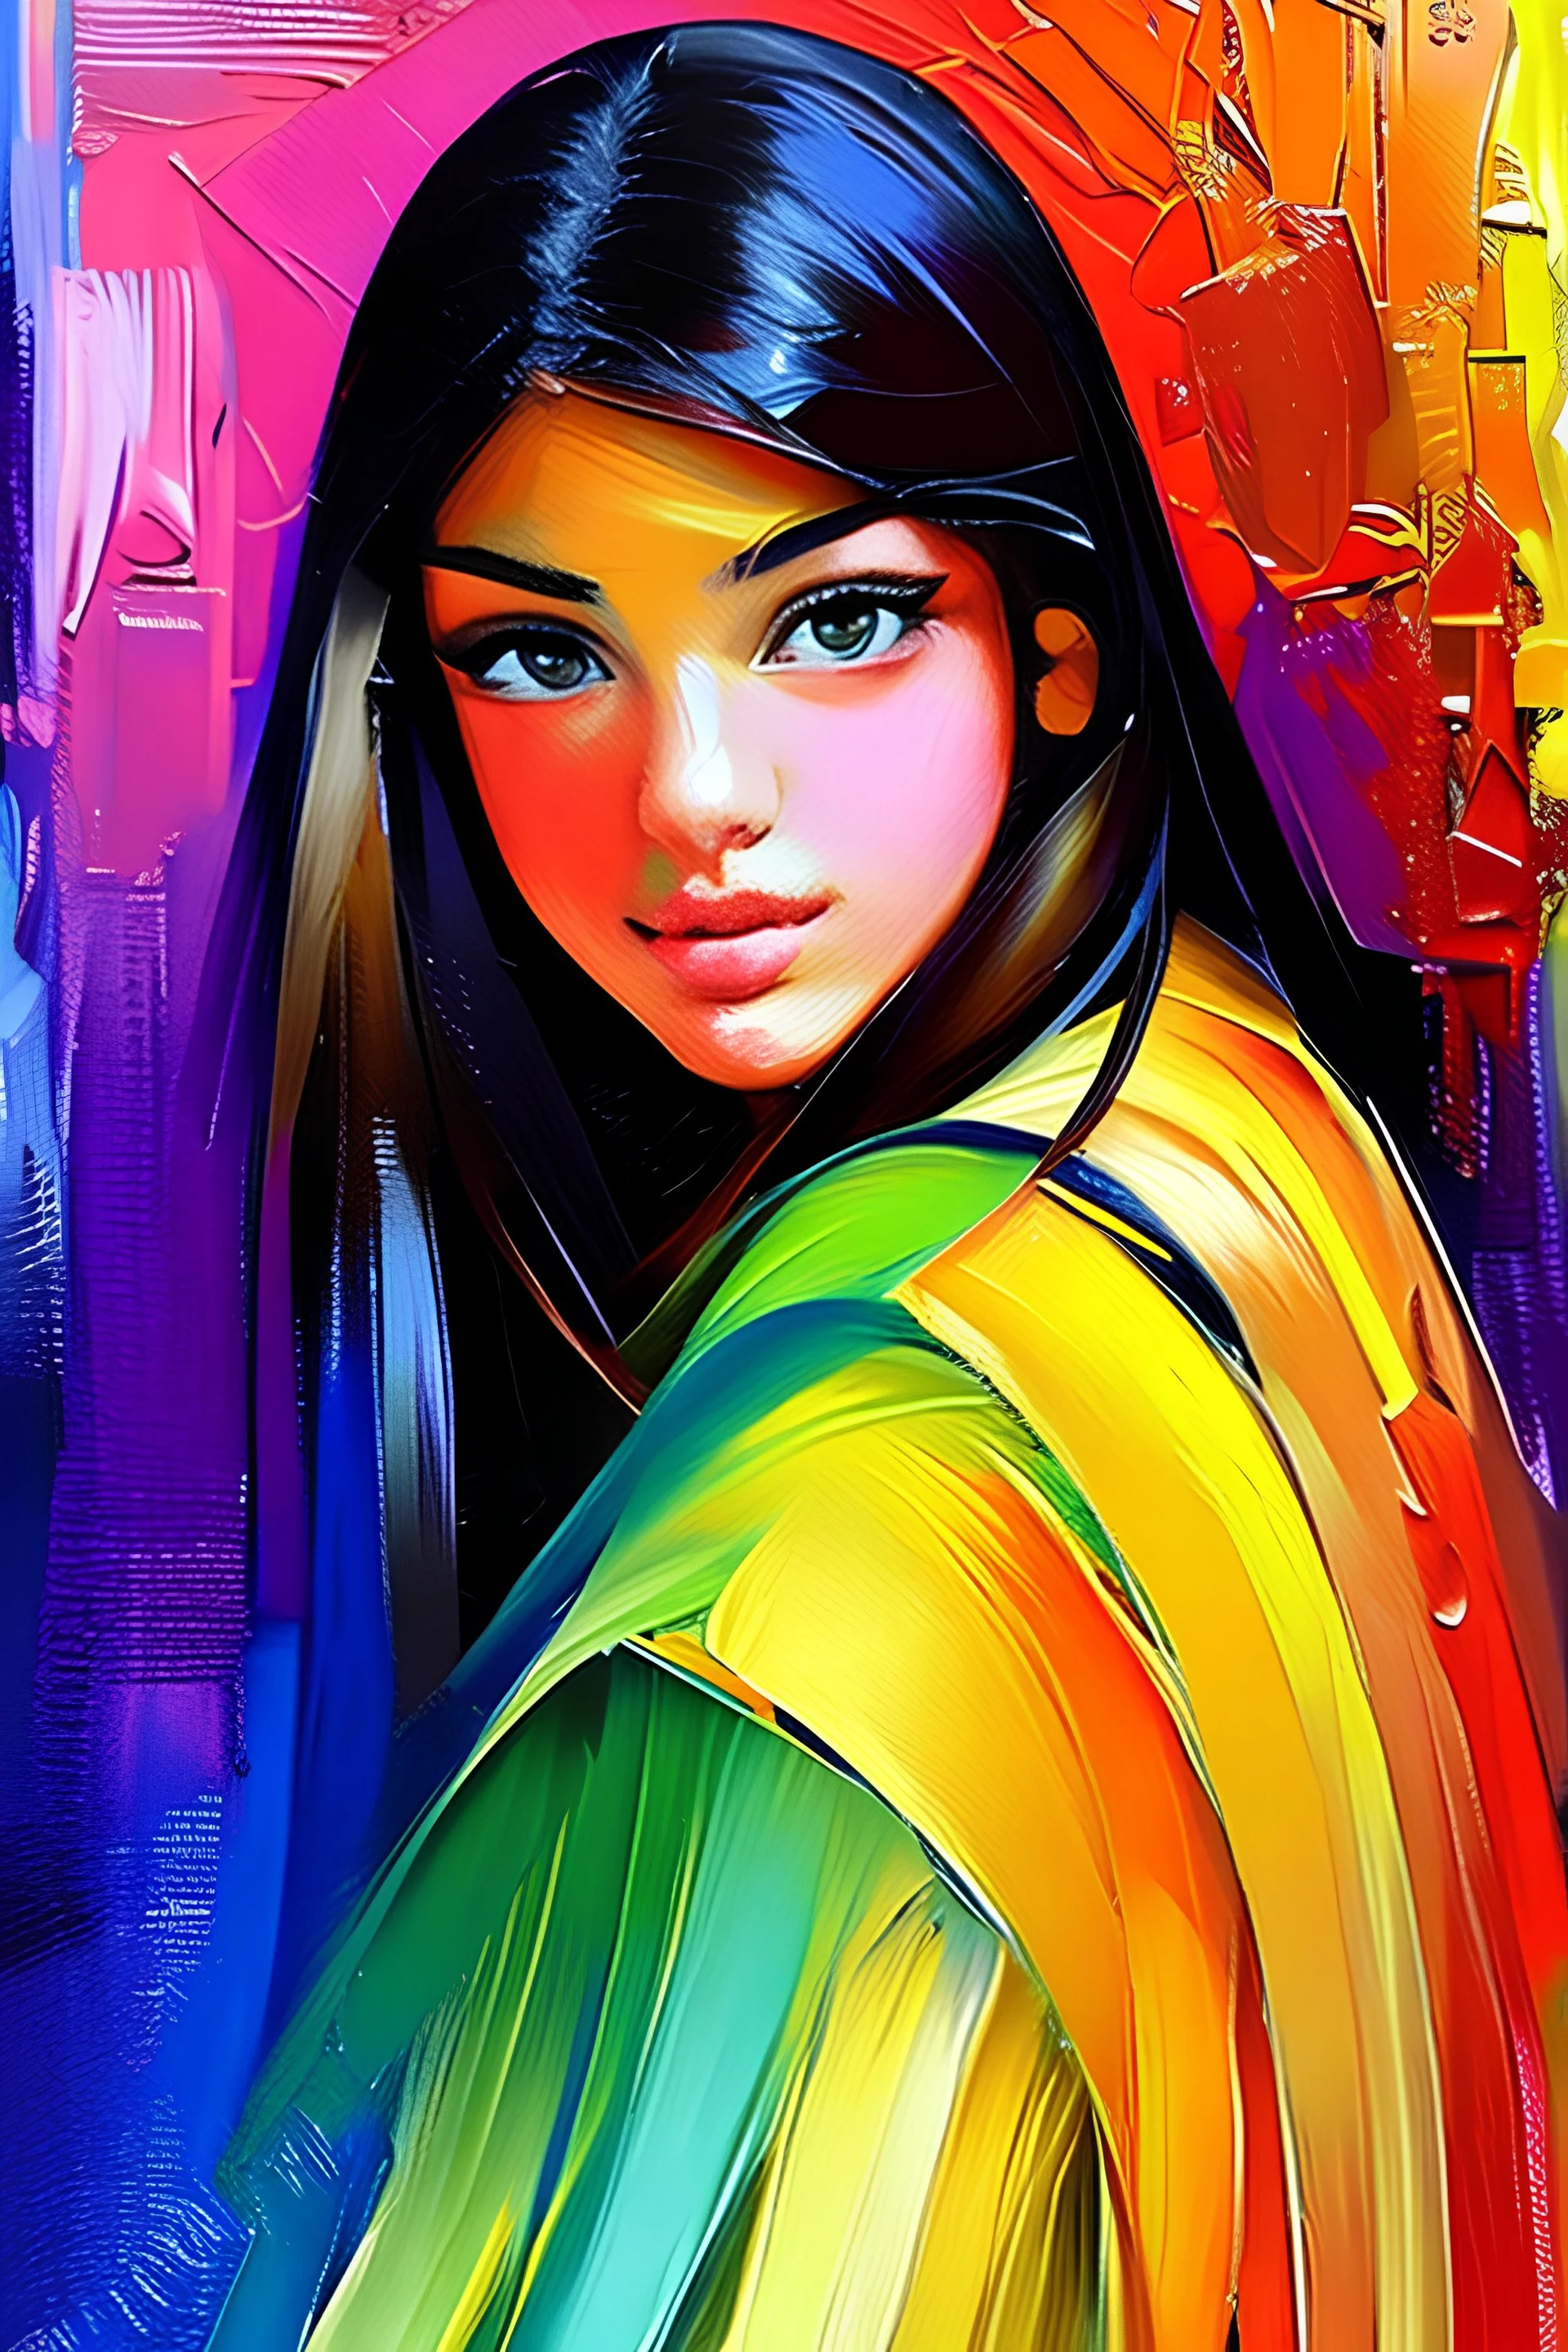 Beautiful girl!! Neo-impressionism expressionist style oil painting :: smooth post-impressionist impasto acrylic painting :: thick layers of colorful textured paint.